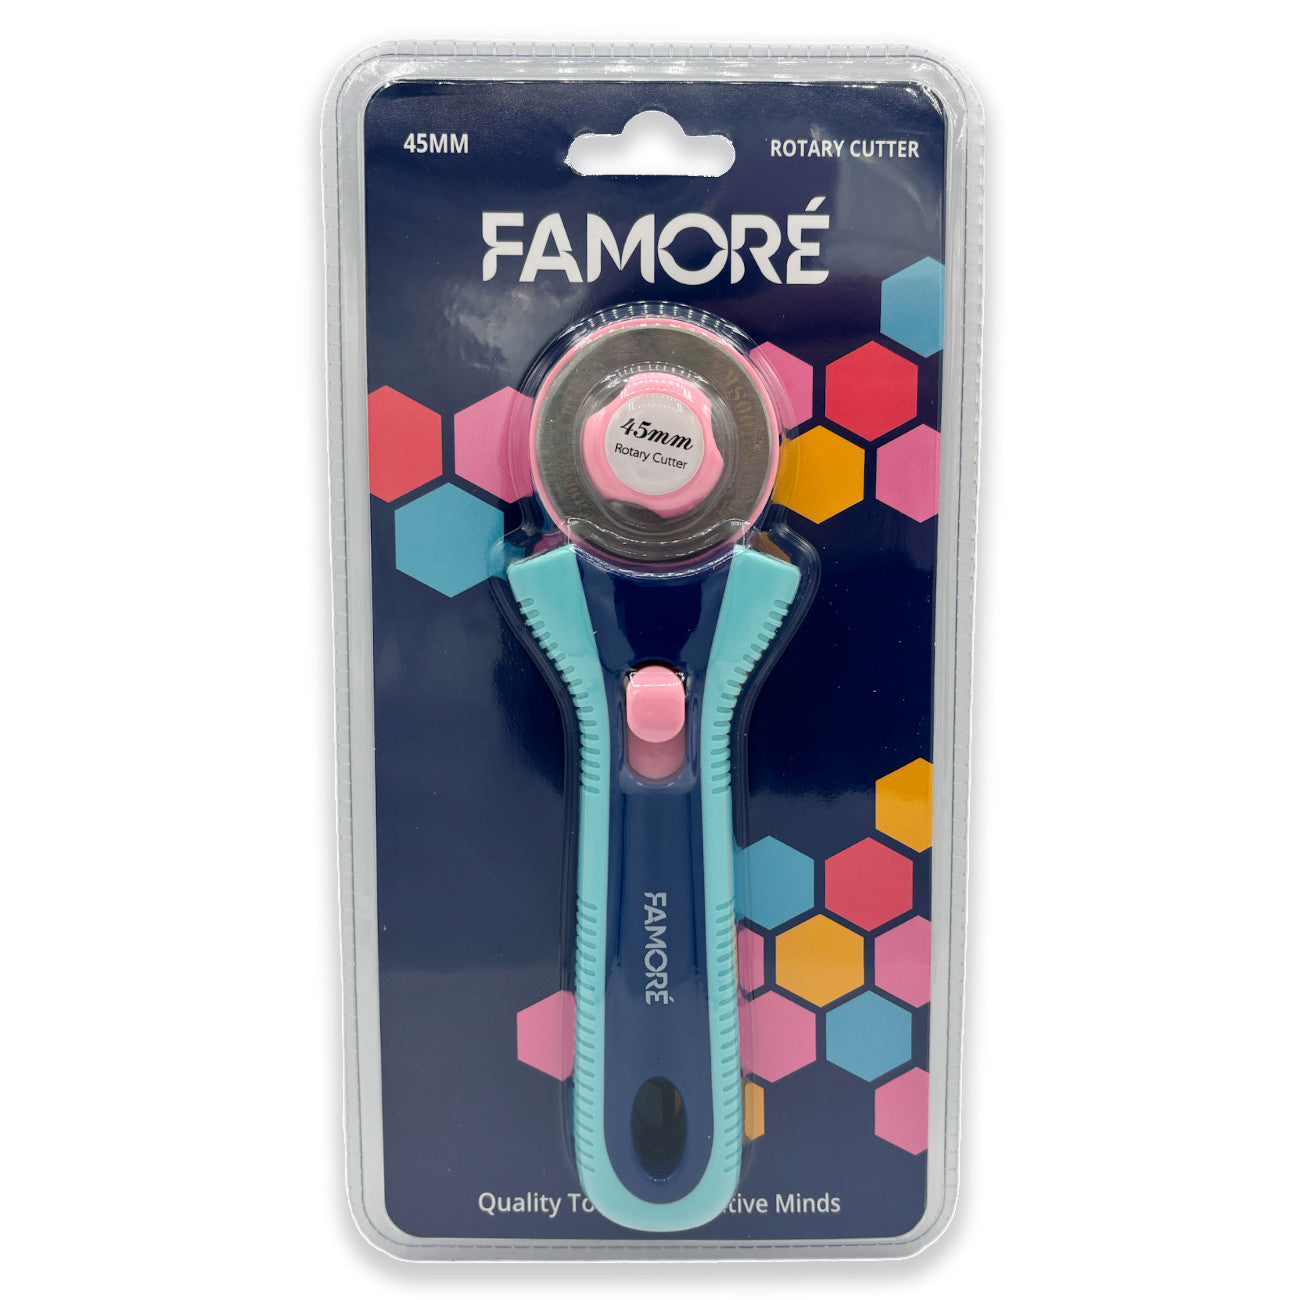 Famore Rotary Cutter - 45mm